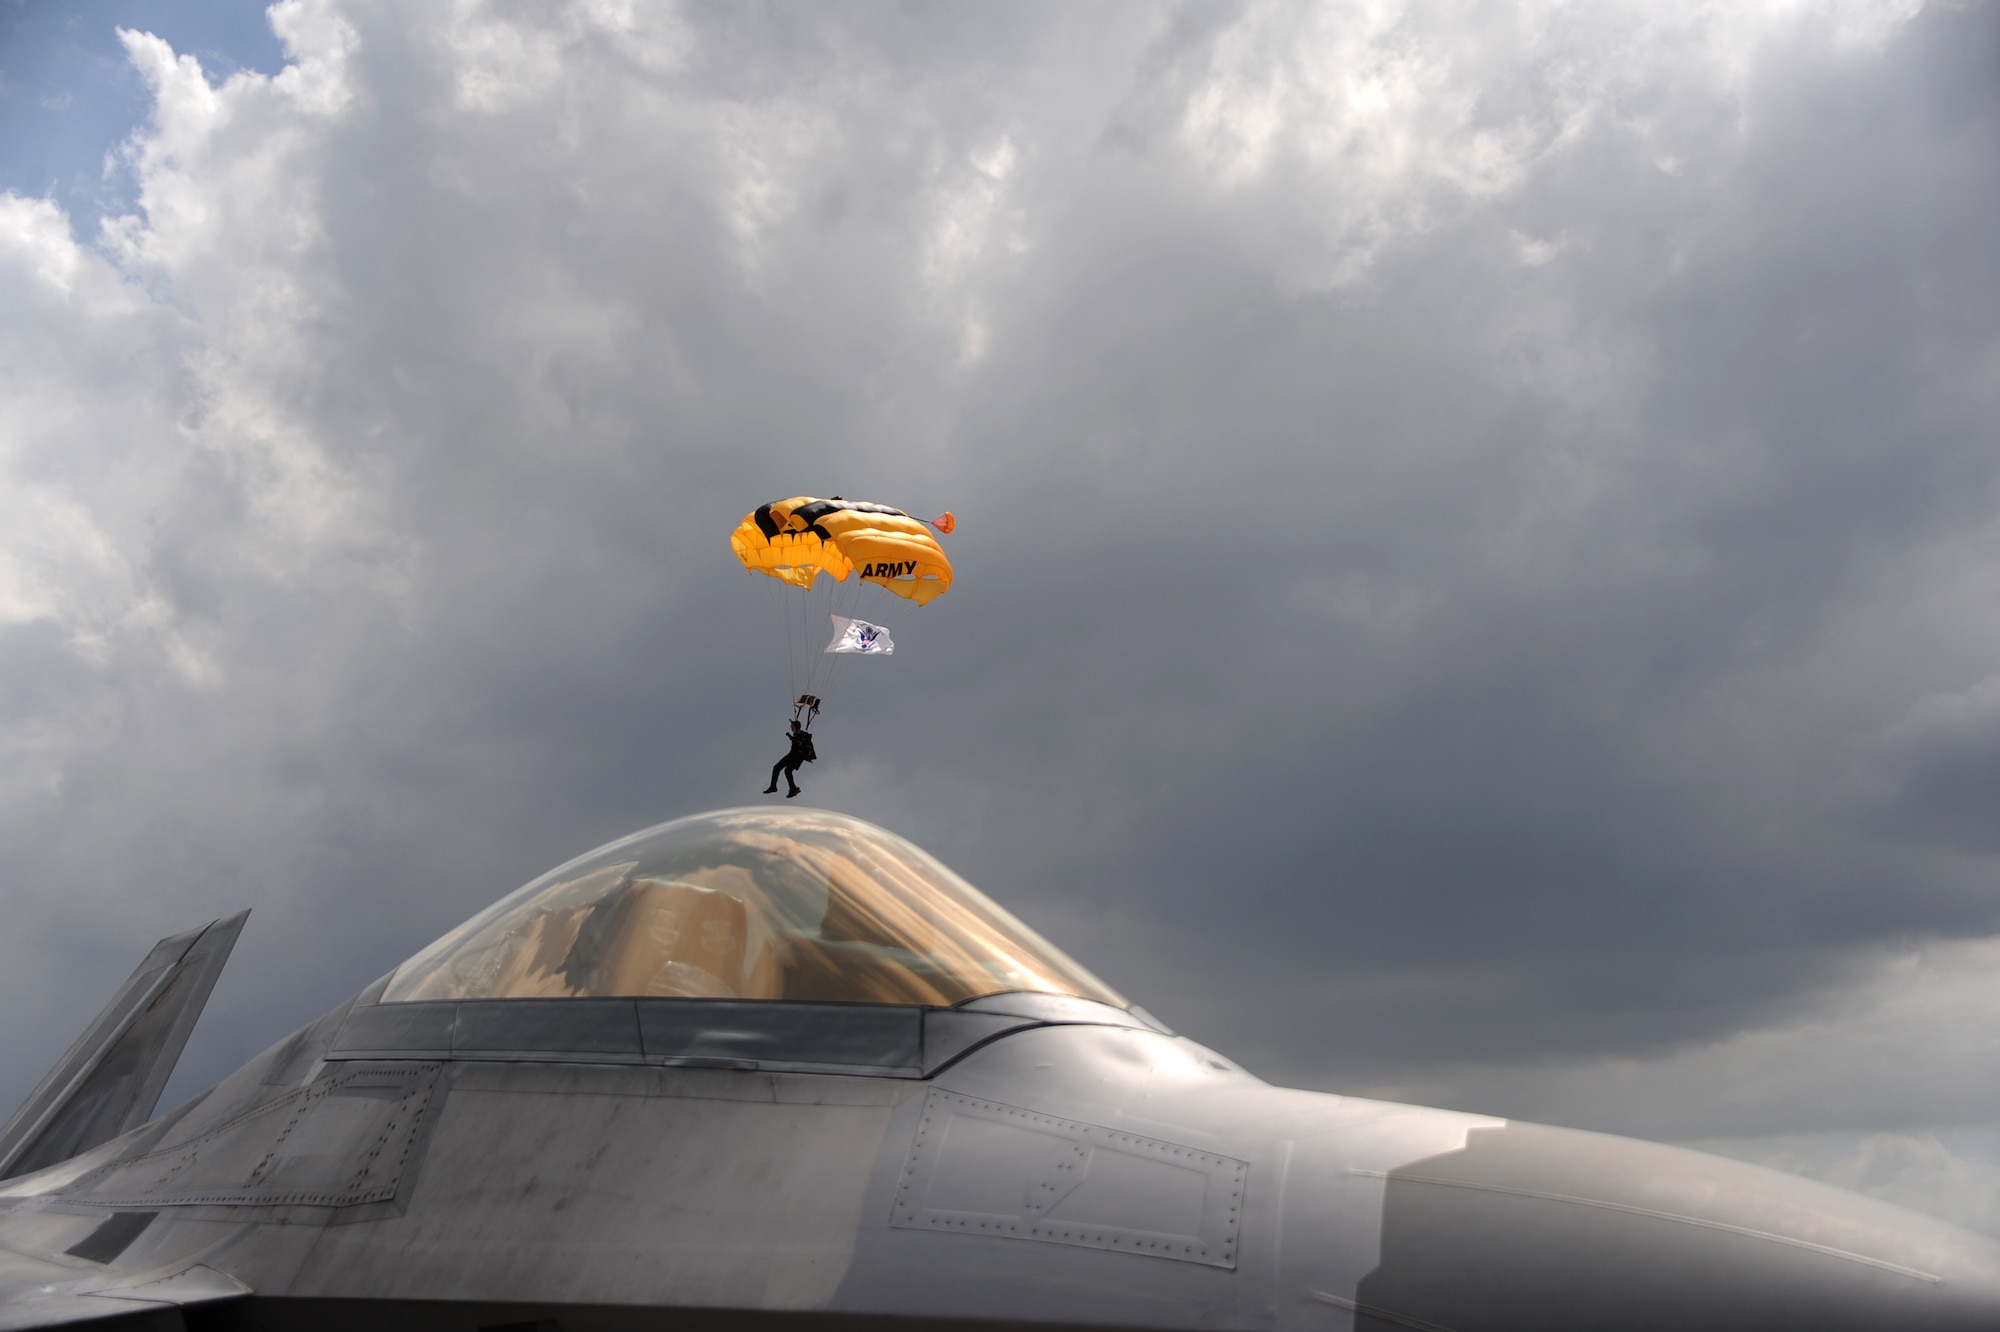 An Army Golden Knights Parachute Team member soars over an Air Force F-22 Raptor during the Memorial Day weekend National Salute to America’s Heroes Miami Air and Sea Show at U.S. Coast Guard Air Station Miami in Opa-Locka, Fla., May 26, 2017. Air Force, Army, Navy, Marine Corps, and Coast Guar service members are participating in the air and sea show to demonstrate their capabilities to the public, educate, and increase awareness of each branch’s unique mission and role. (U.S. Air Force photo by Senior Airman Erin Trower)